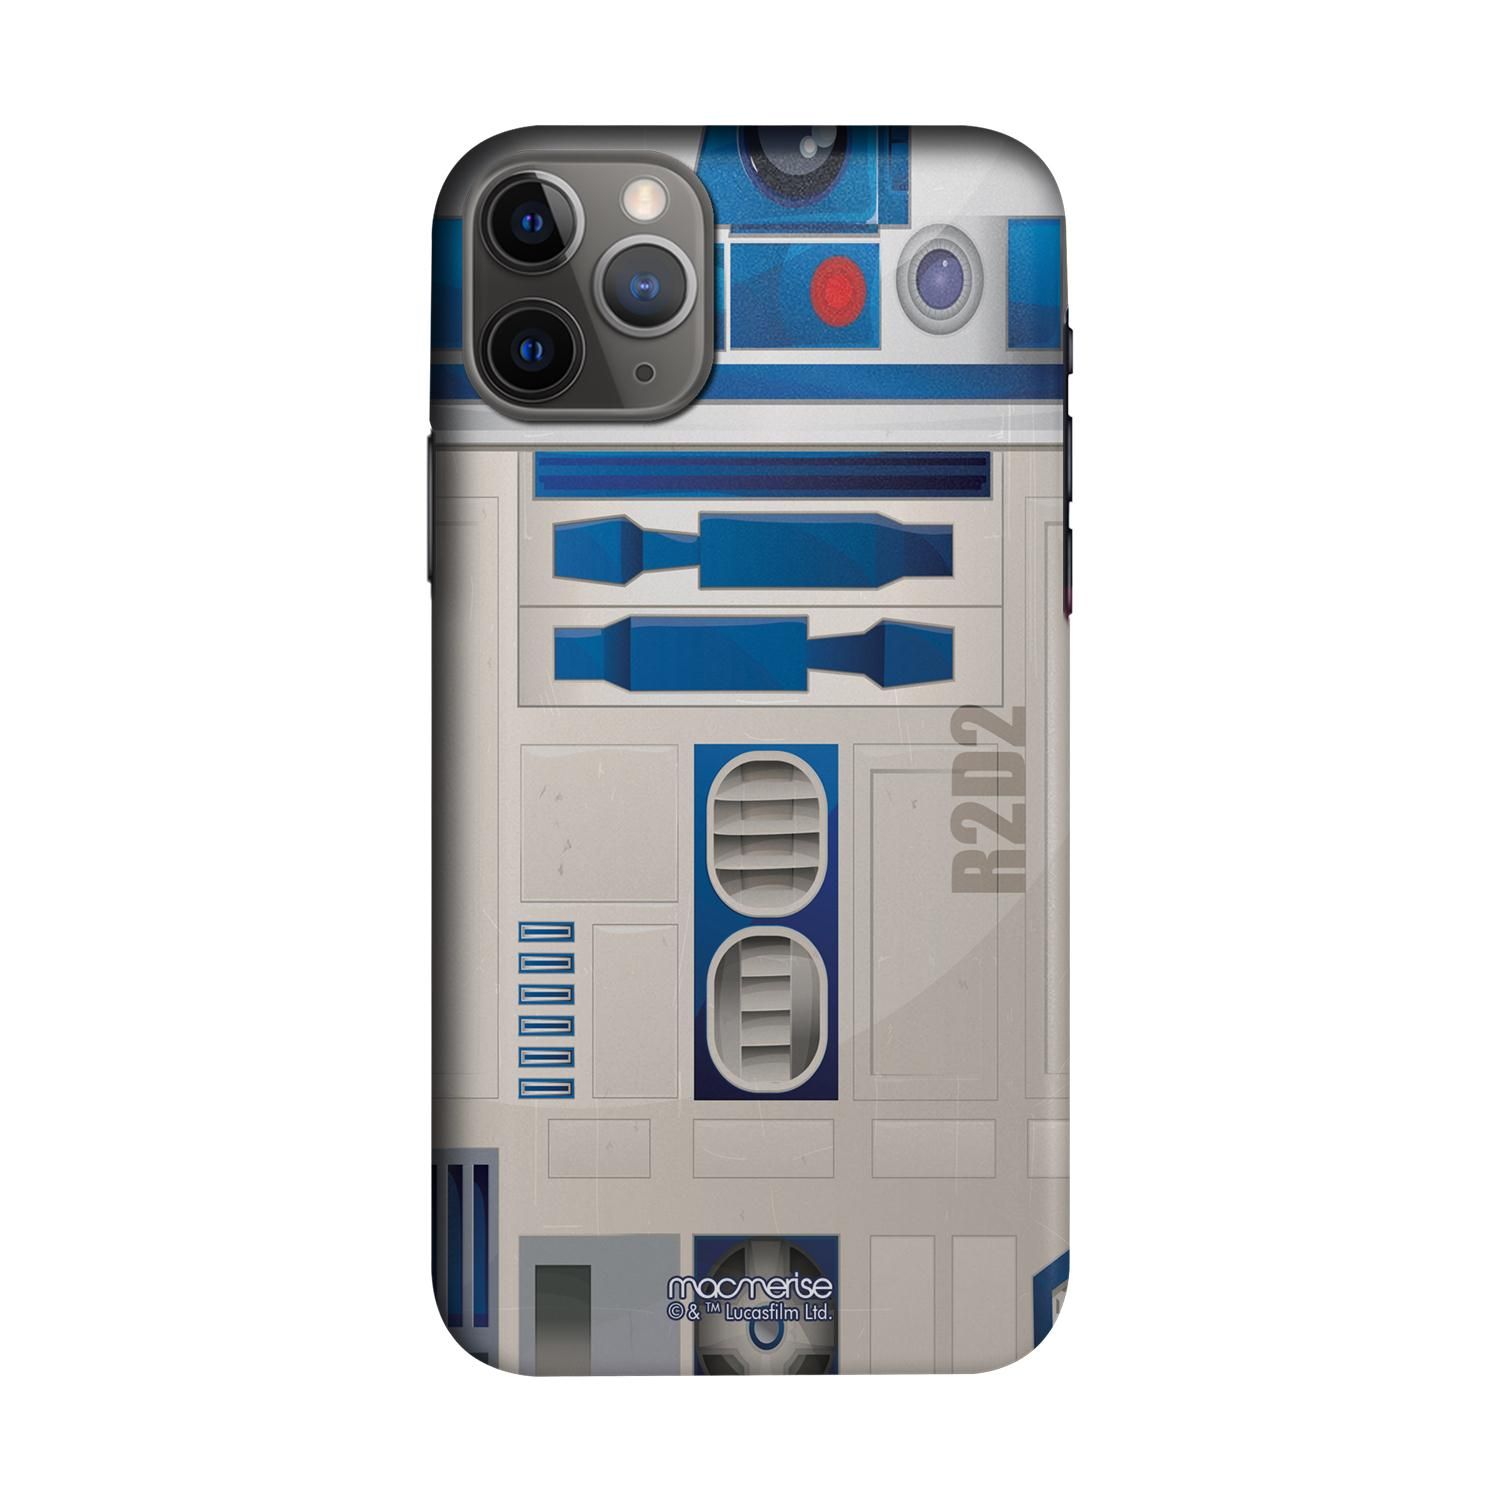 Buy Attire R2D2 - Sleek Phone Case for iPhone 11 Pro Max Online